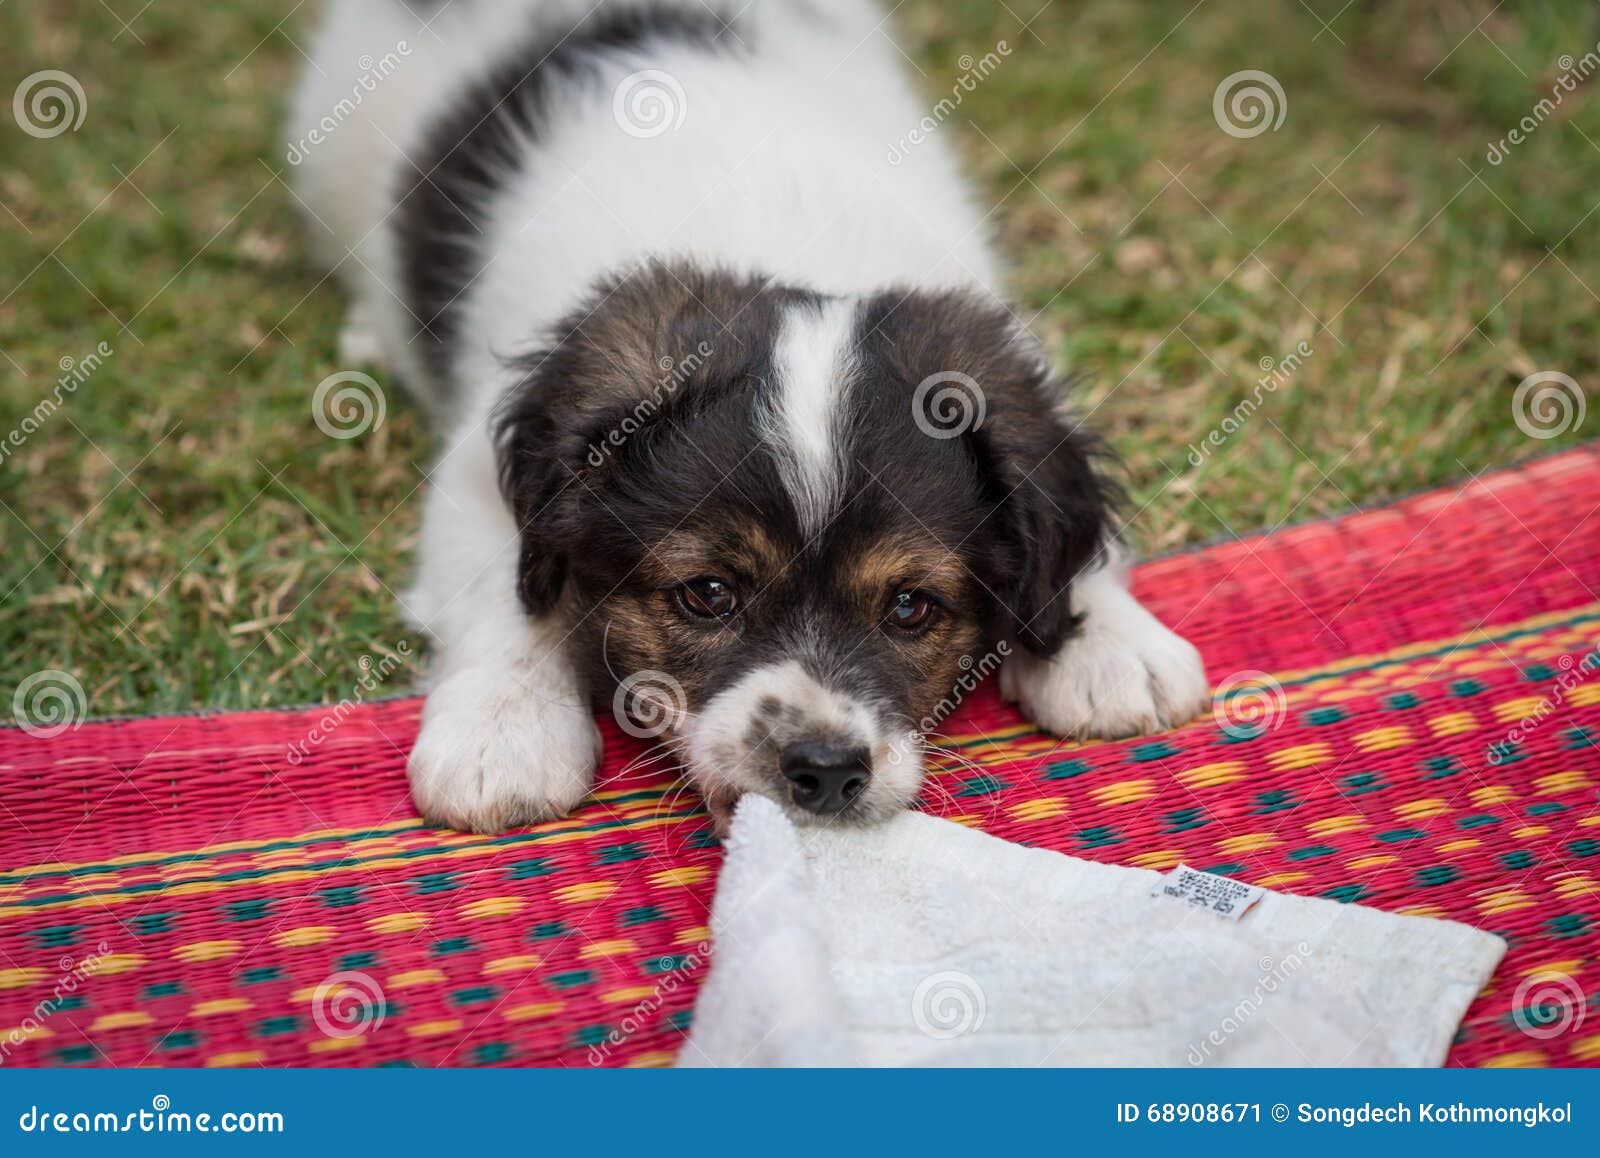 Playing puppy stock image. Image of adorable, sleeping - 68908671